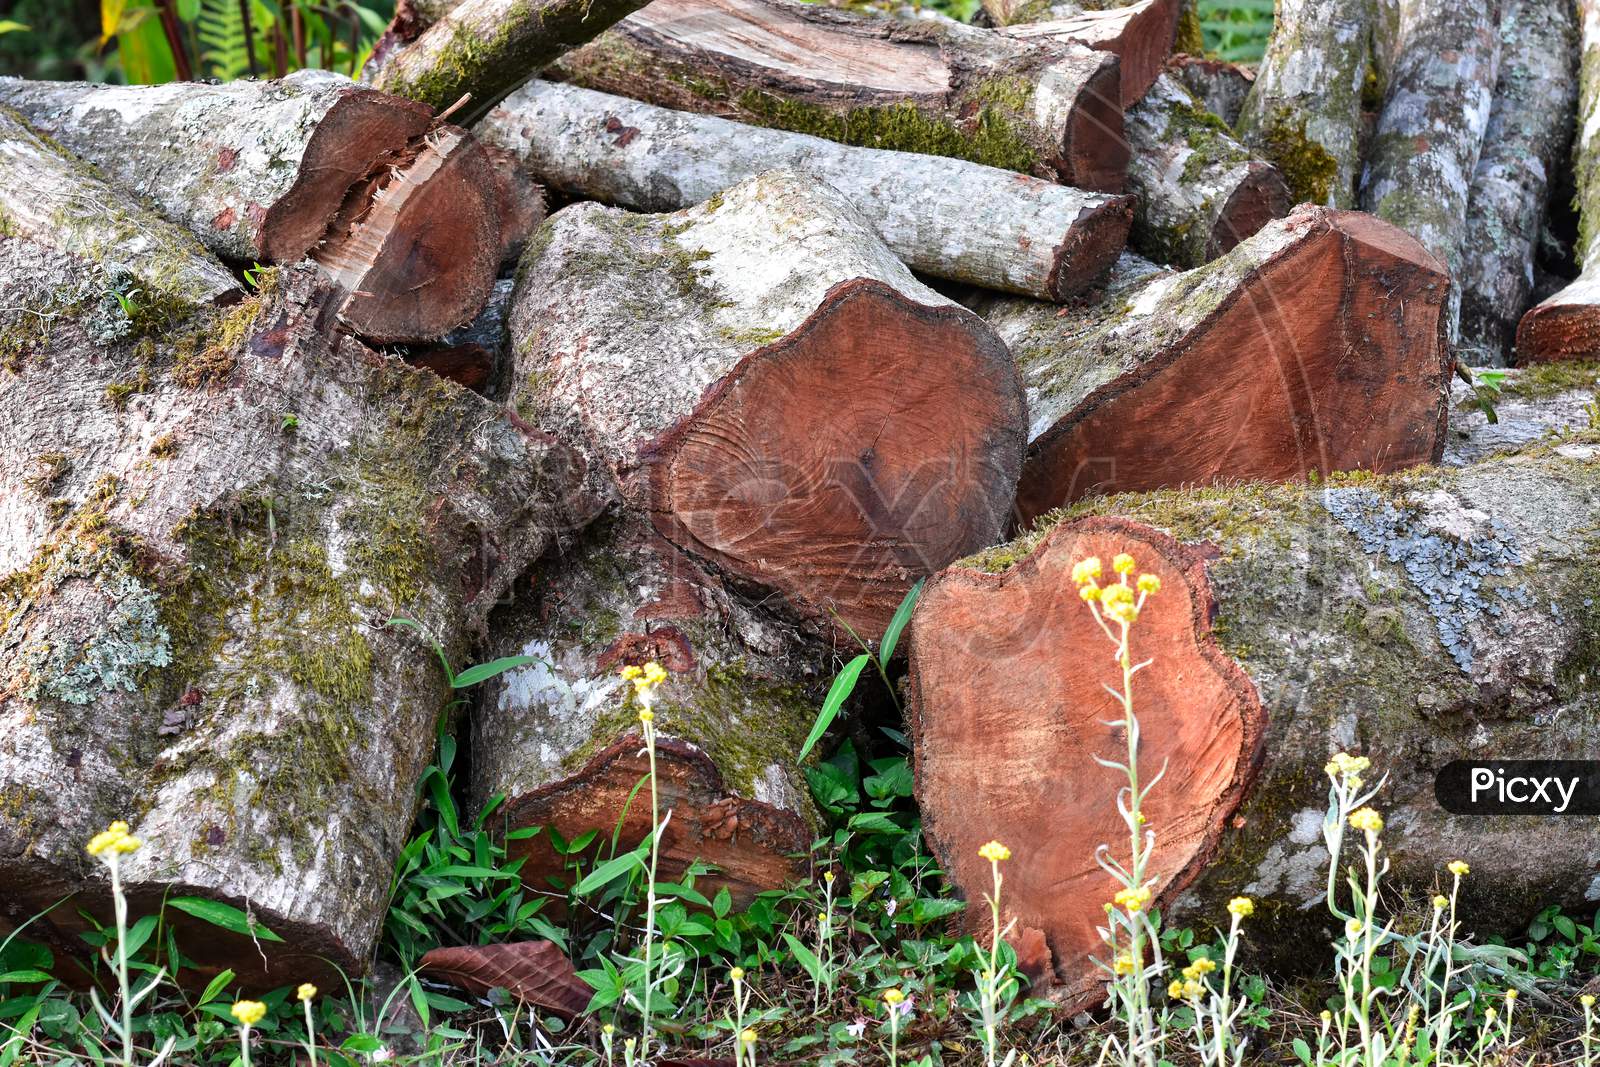 Felled Pine Log Covered With Moss And Lichen, Kalimpong Forest.